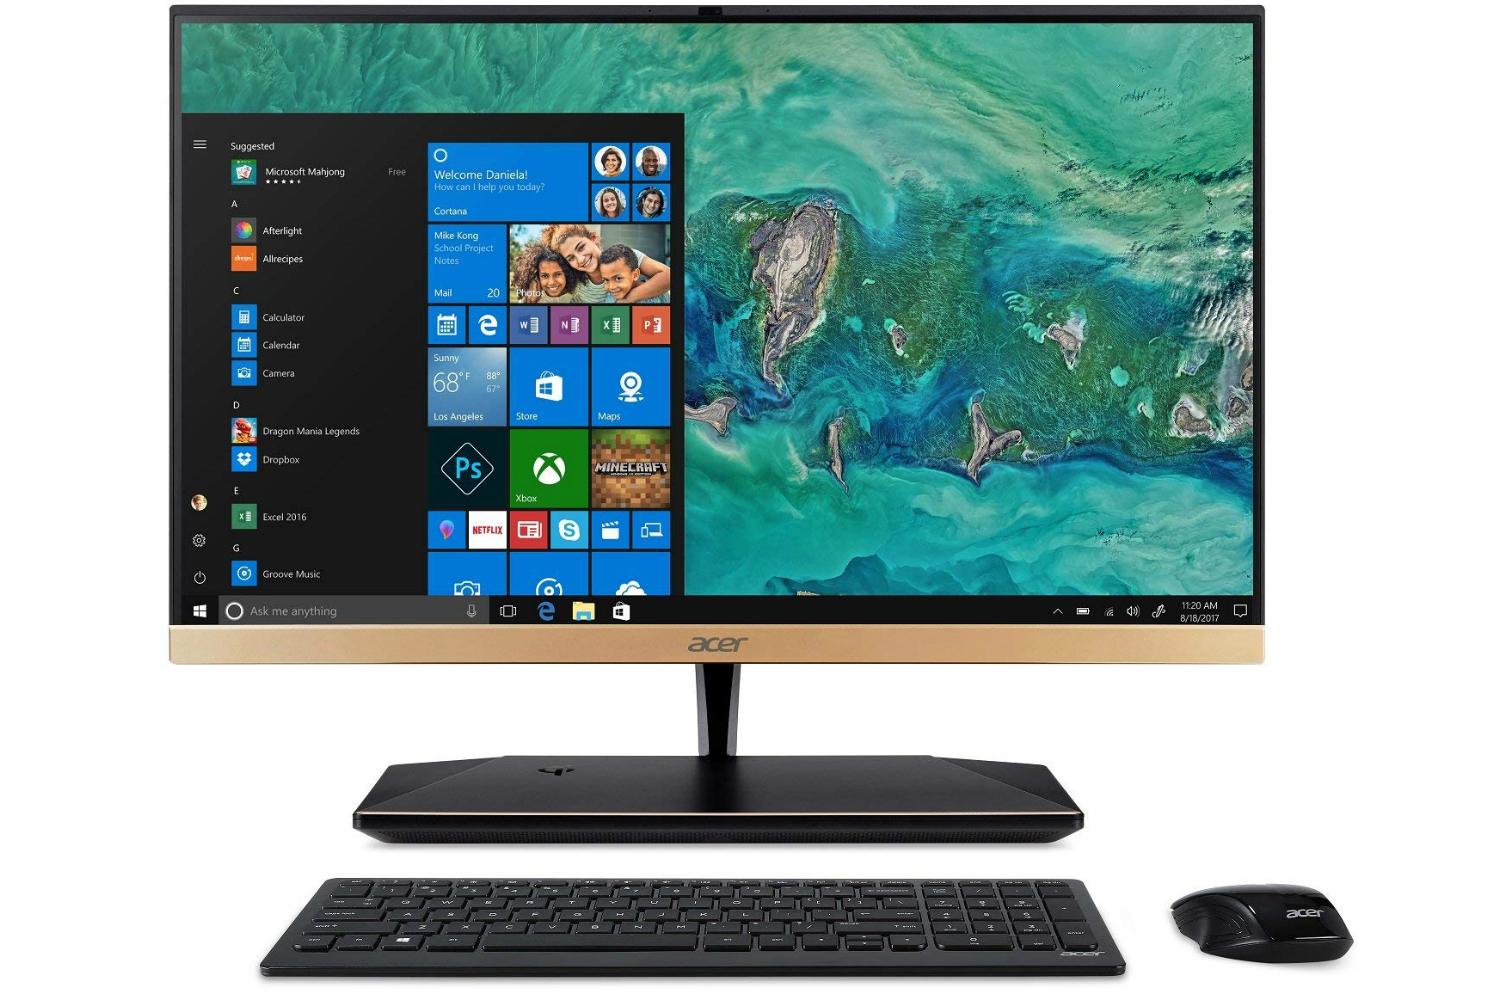 amazon slashes prices on acer laptops desktops monitors and gaming gear aspire s24 880 ur13 aio desktop